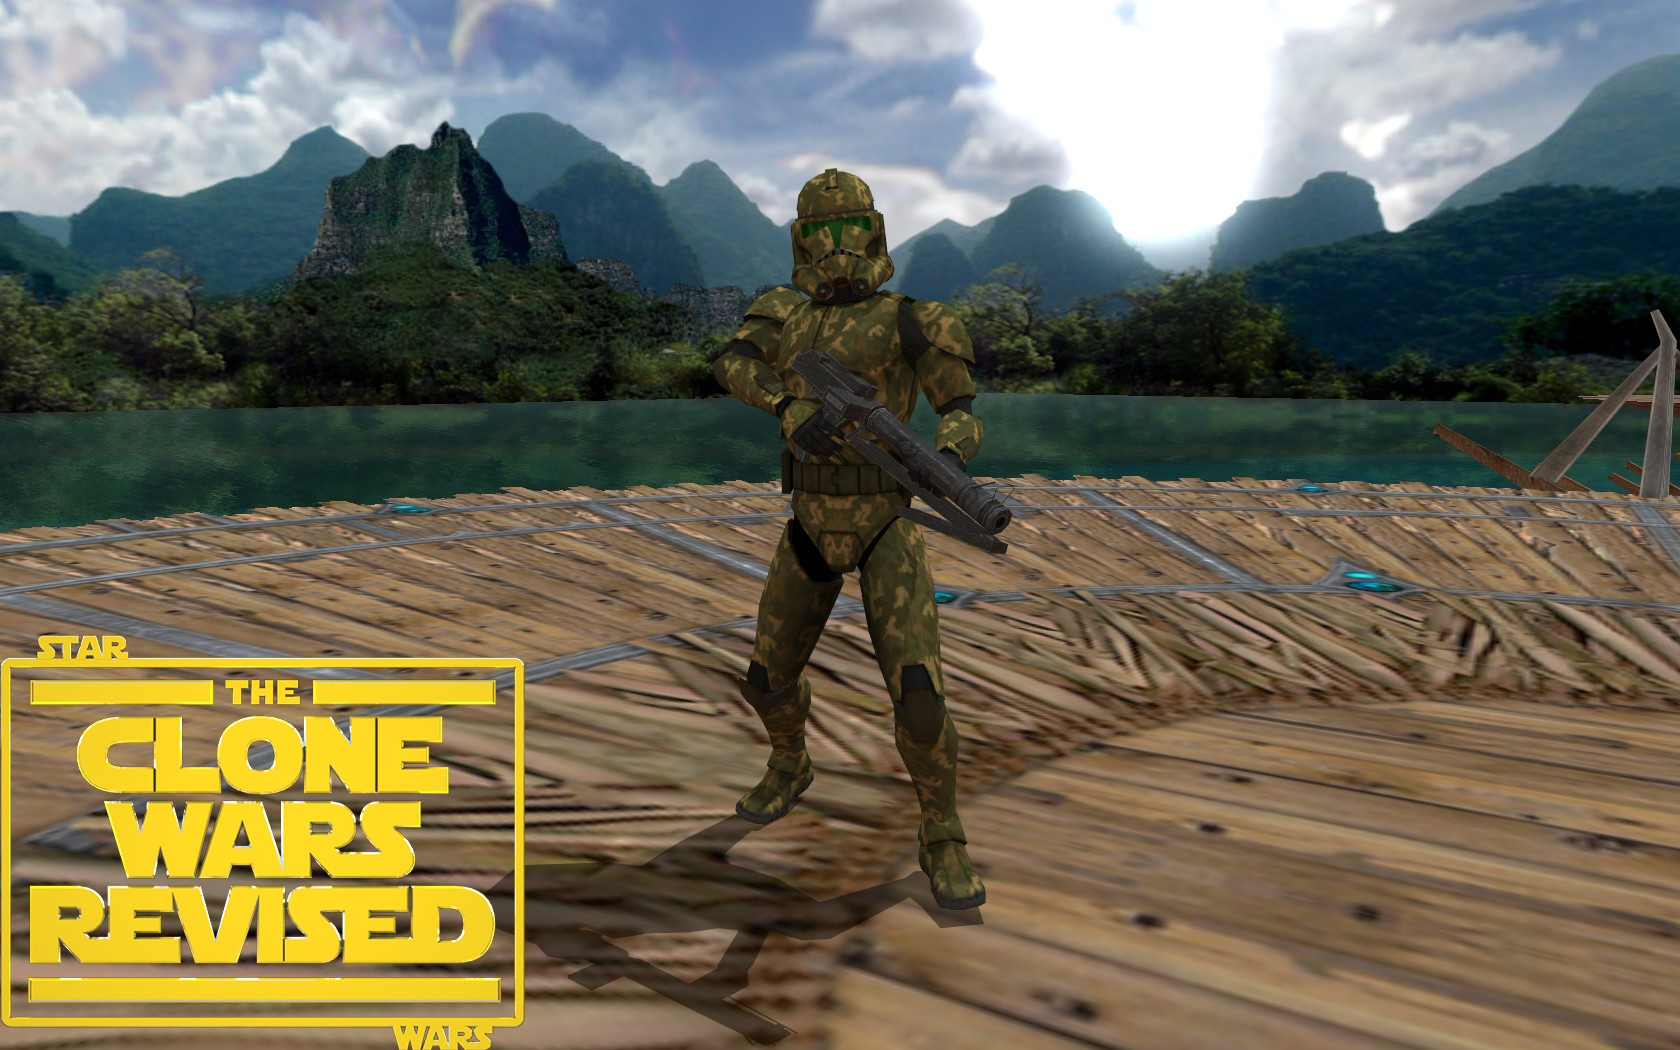 Mod DB - The Clone Wars Revised is a Star Wars Battlefront